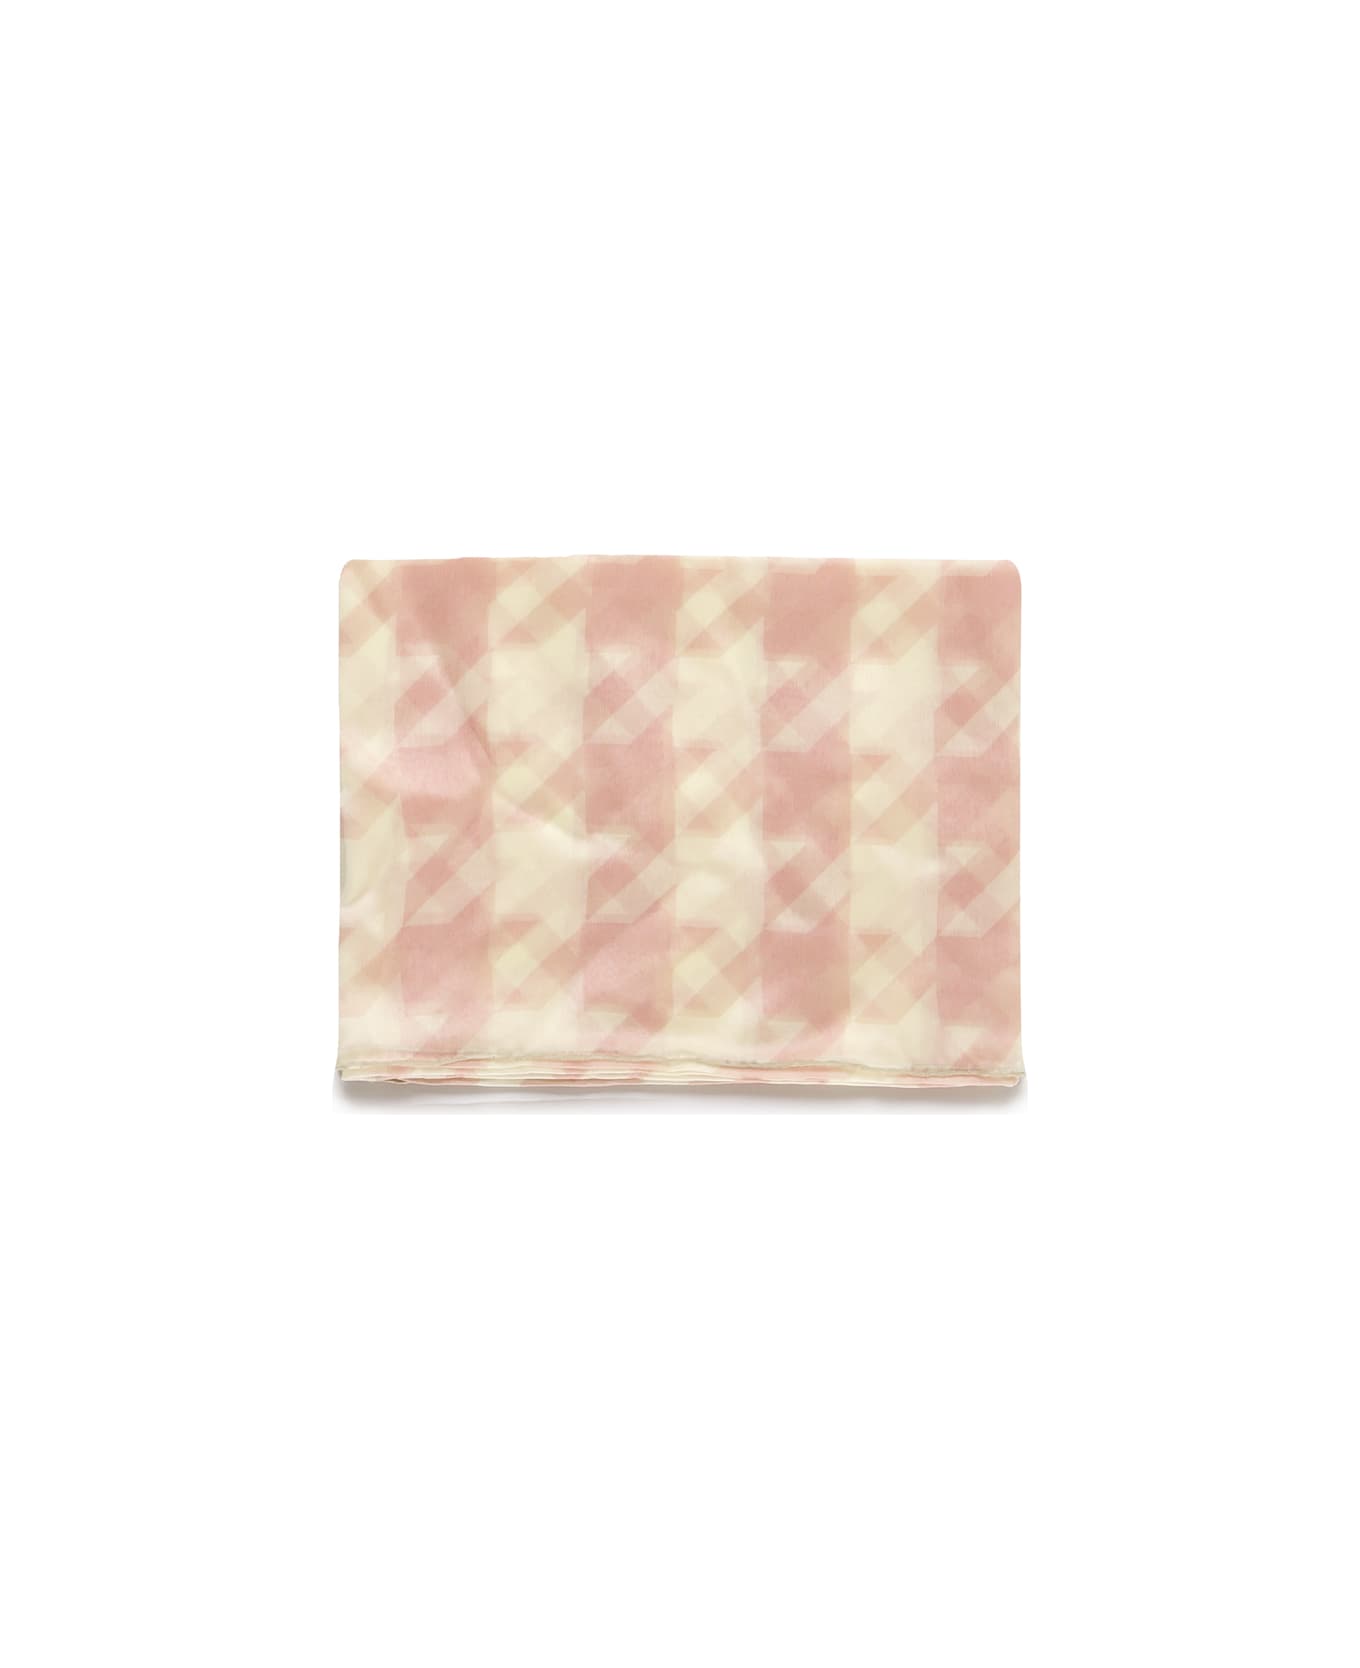 Burberry Silk Scarf With Houndstooth Pattern - Blush/sherbet スカーフ